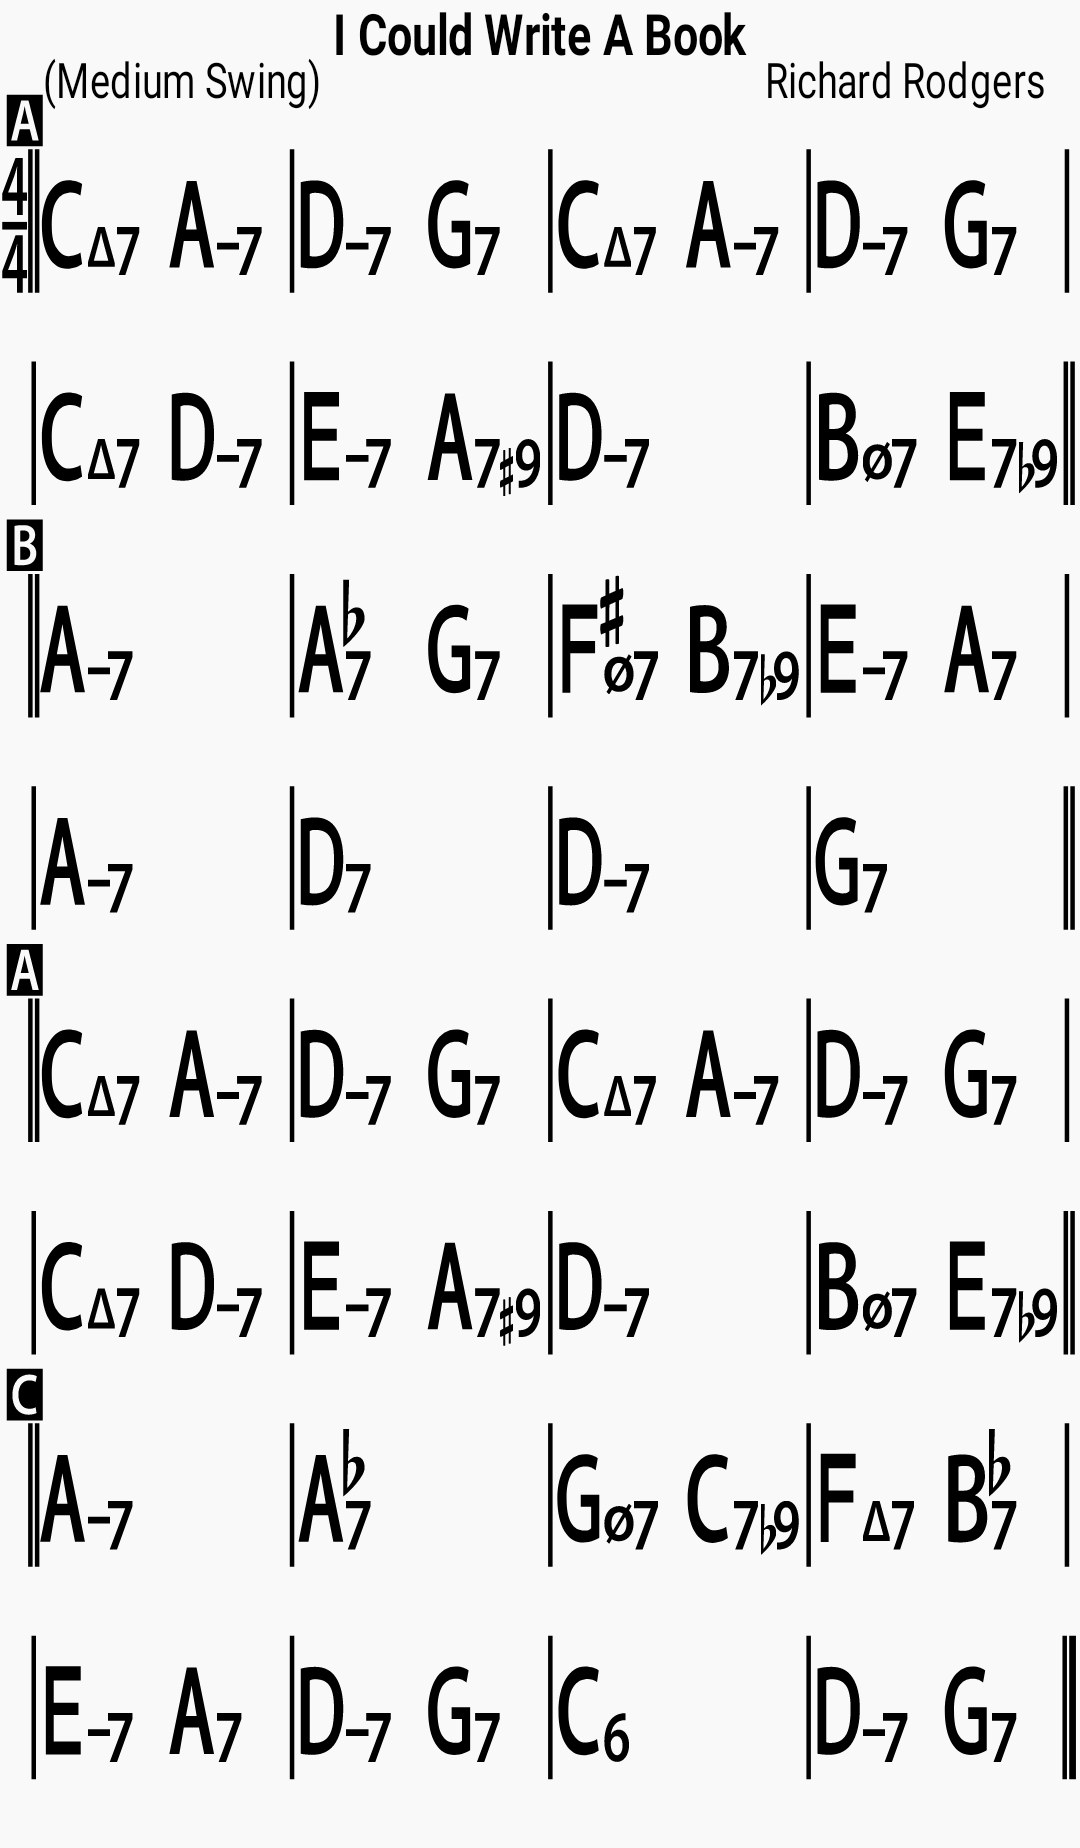 Chord chart for the jazz standard I Could Write A Book